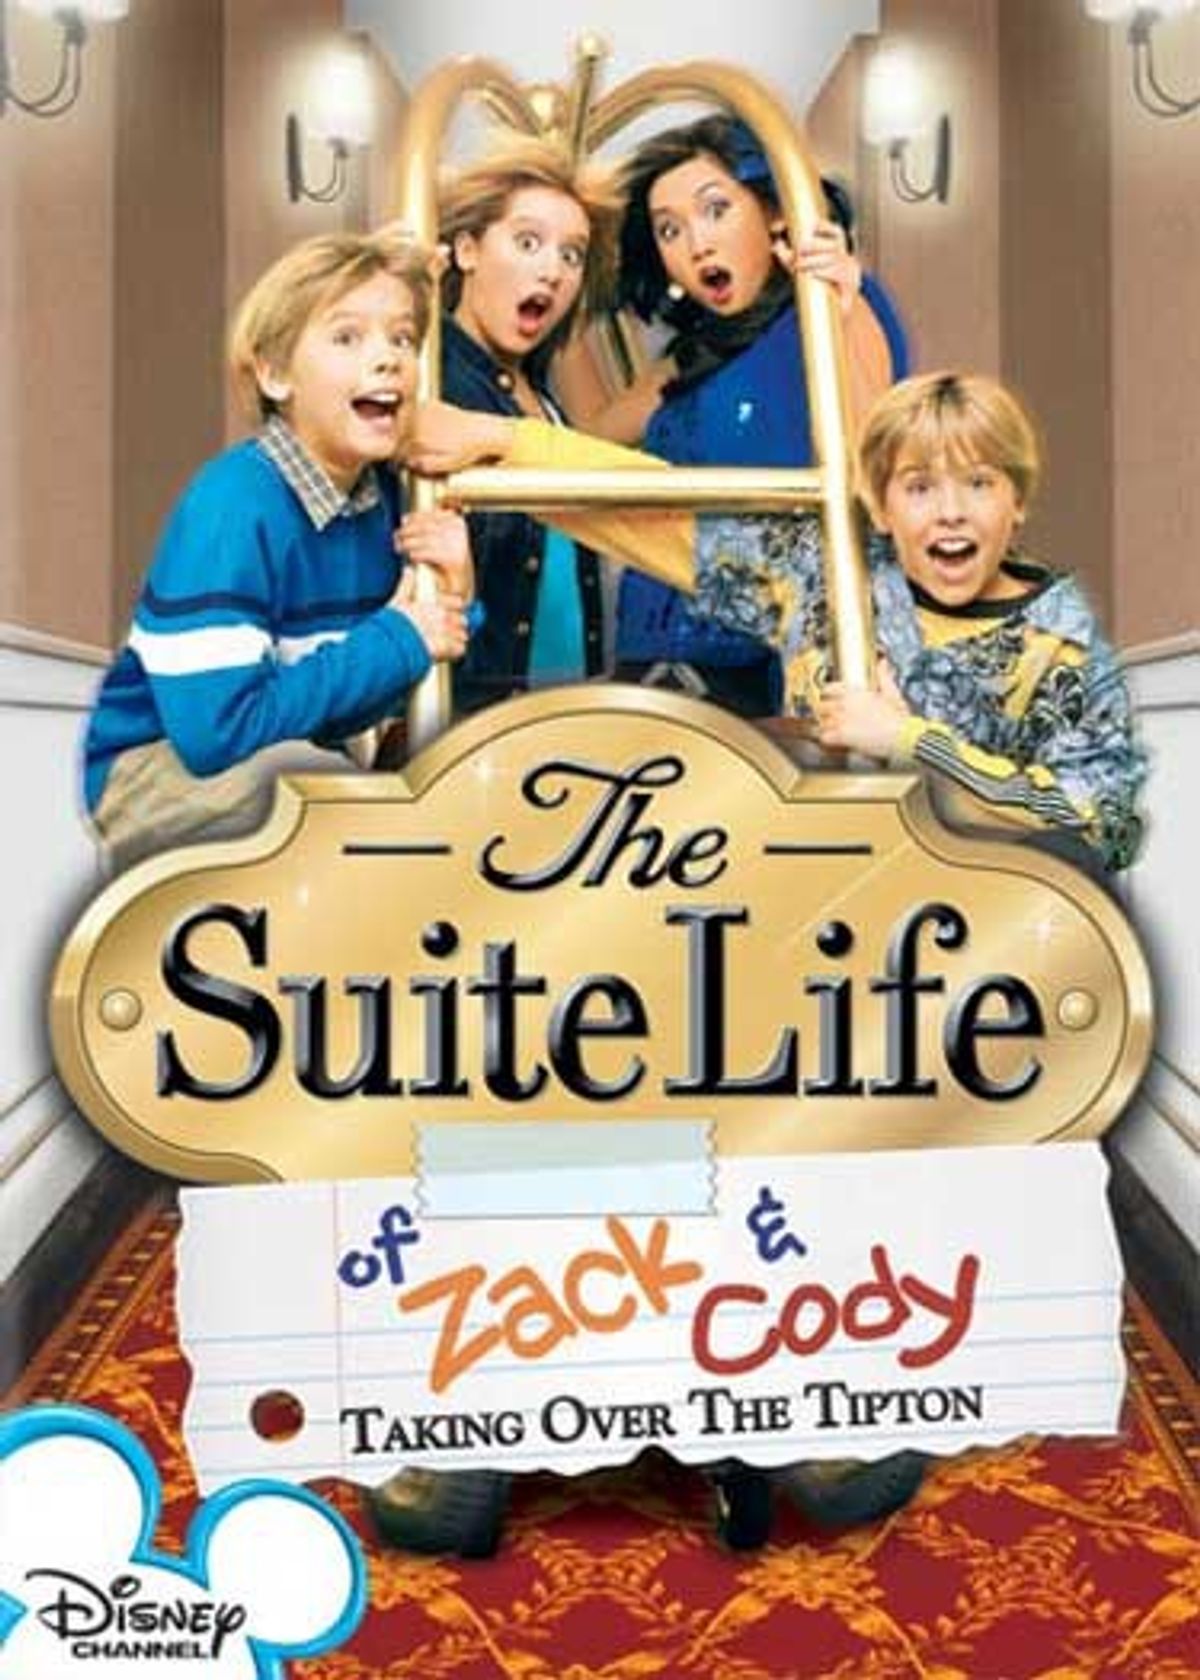 College As Told By "The Suite Life Of Zack And Cody"